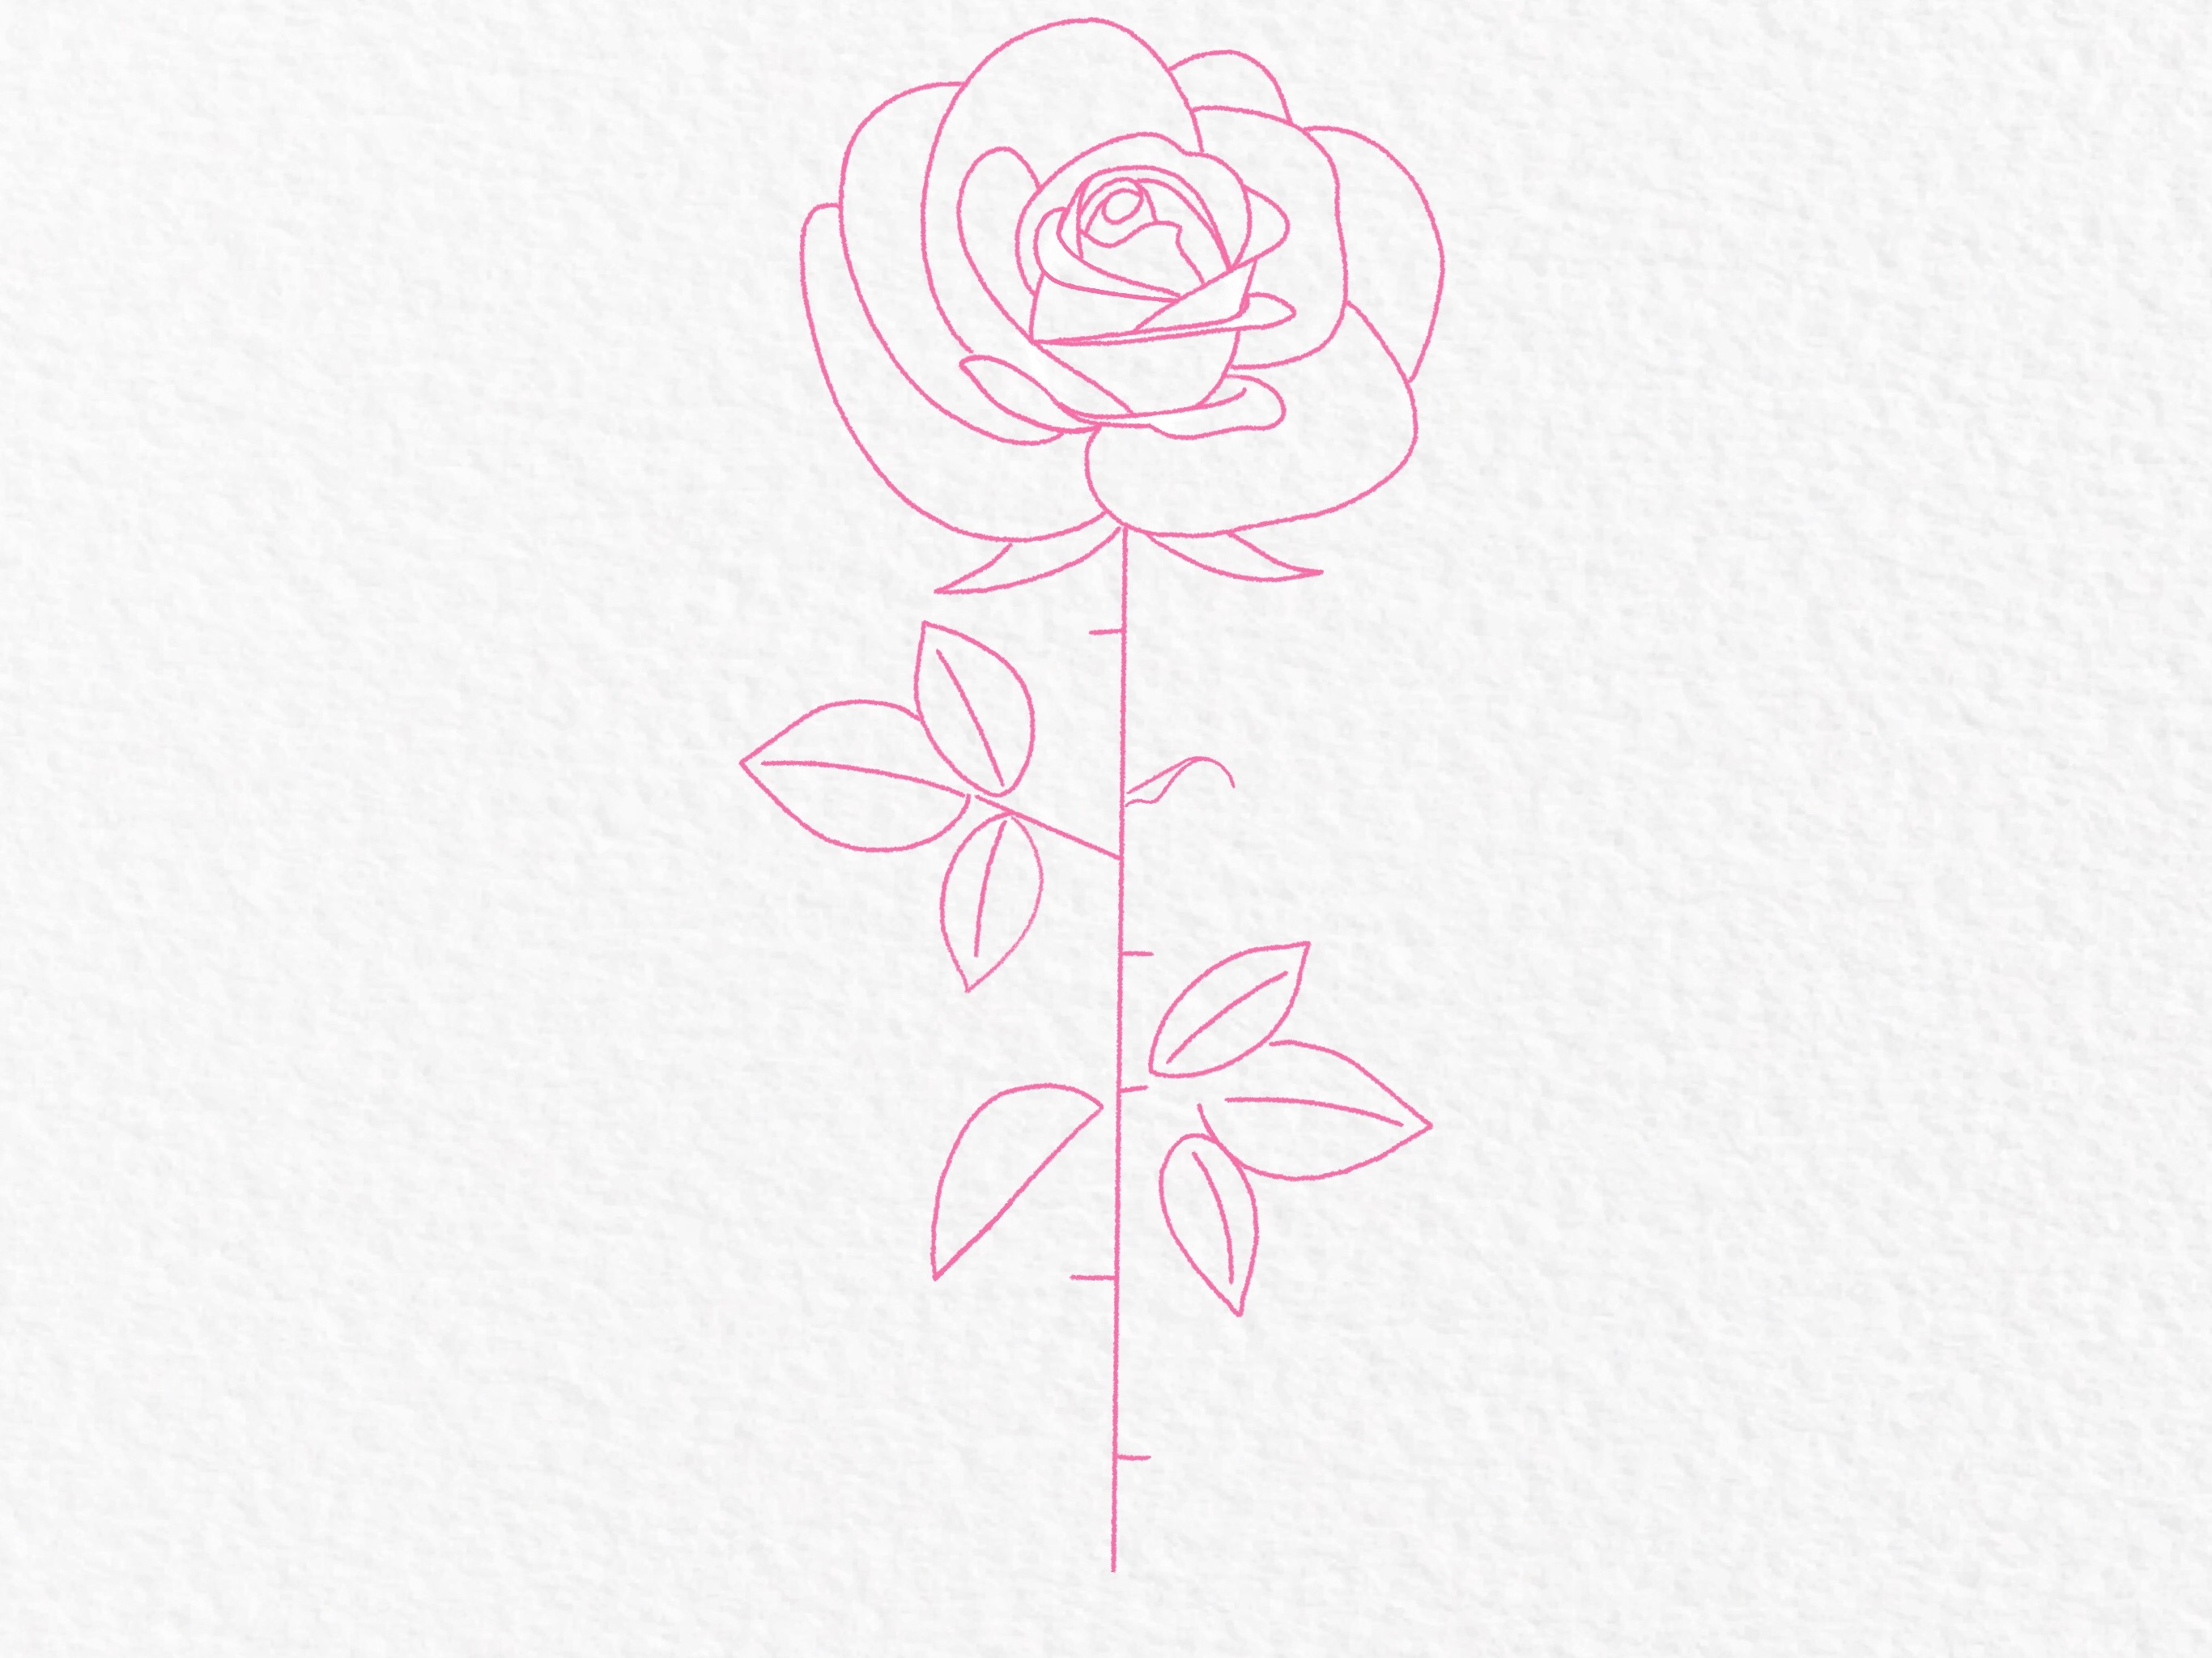 How to draw a rose, step by step drawing tutorial - step 27